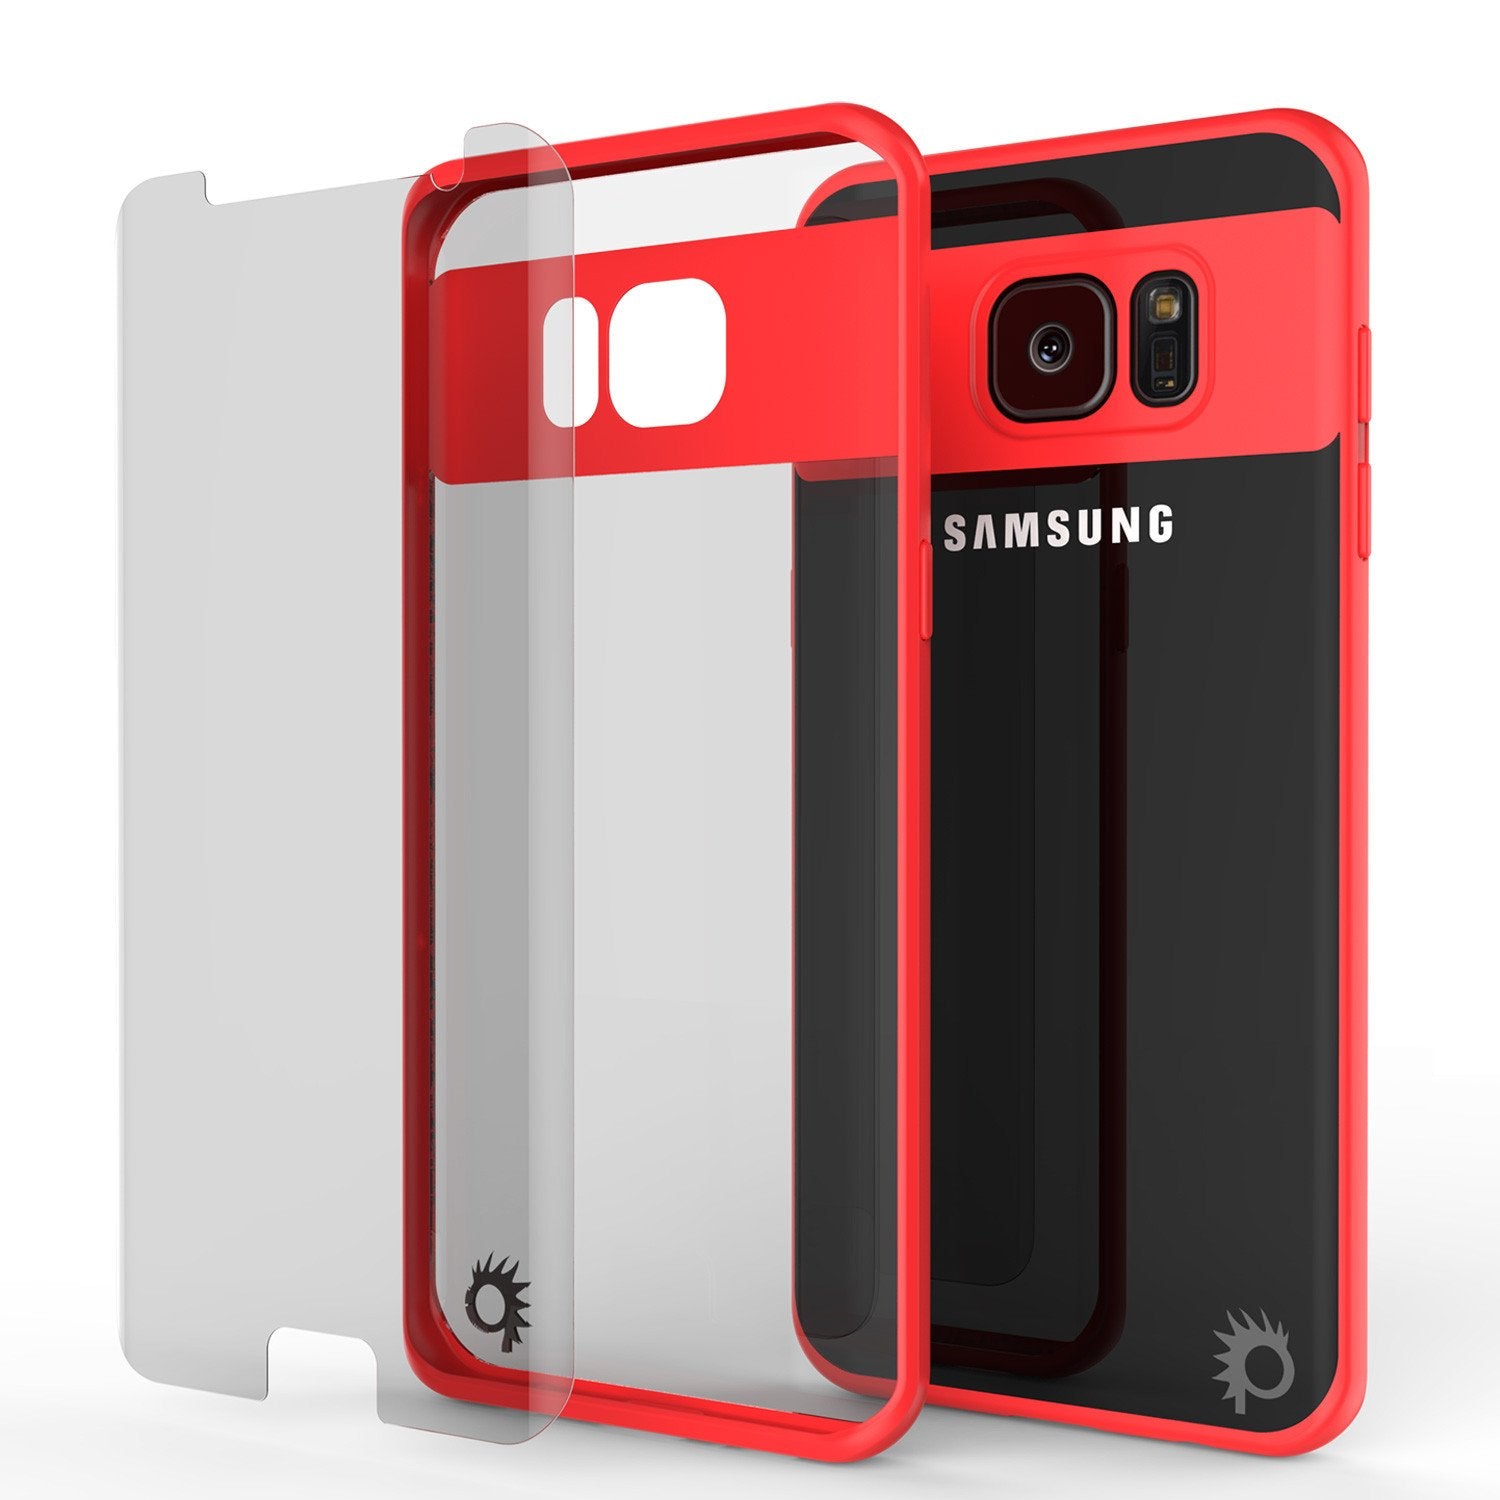 Galaxy S7 Edge Case [MASK Series] [RED] Full Body Hybrid Dual Layer TPU Cover W/ Protective PUNKSHIELD Screen Protector